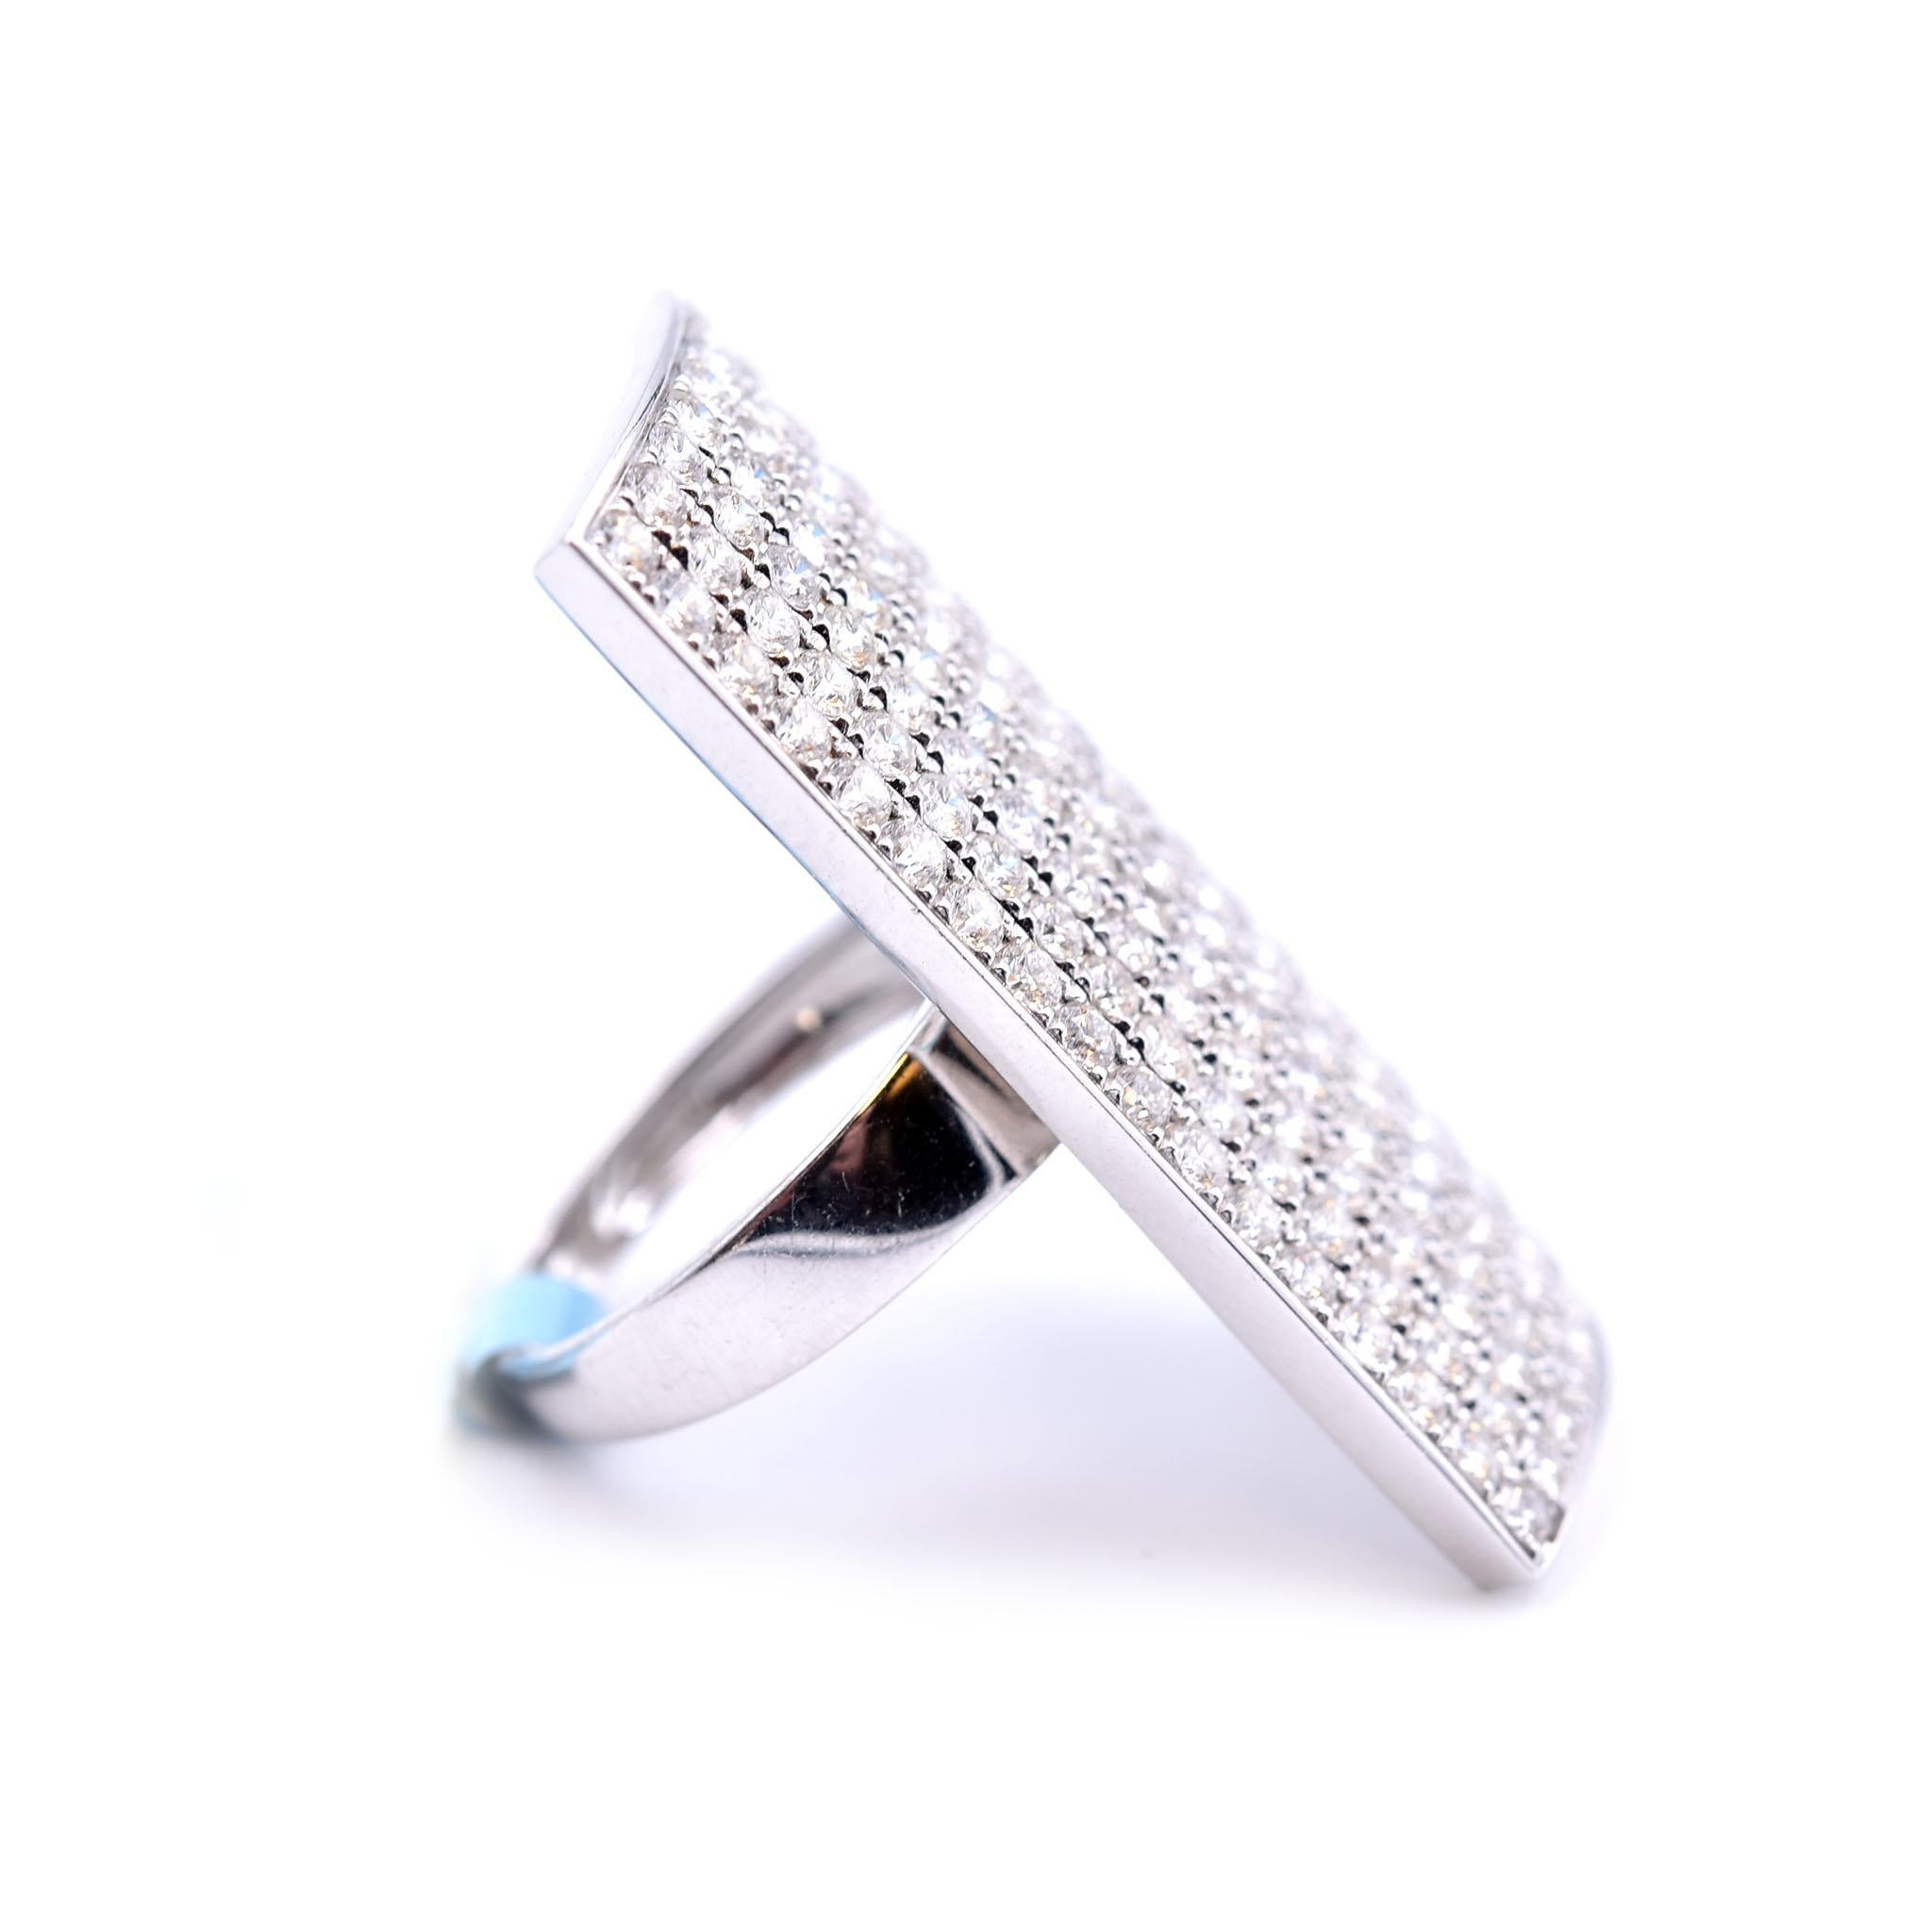 Designer: custom design
Material: 18k white gold
Diamonds: 153 round brilliant cut = 3.89cttw
Color: G
Clarity: VS
Size: 7 (please allow two additional shipping days for sizing requests)
Dimensions: ring top is 37mm by 19mm
Weight: 10.48 grams	
